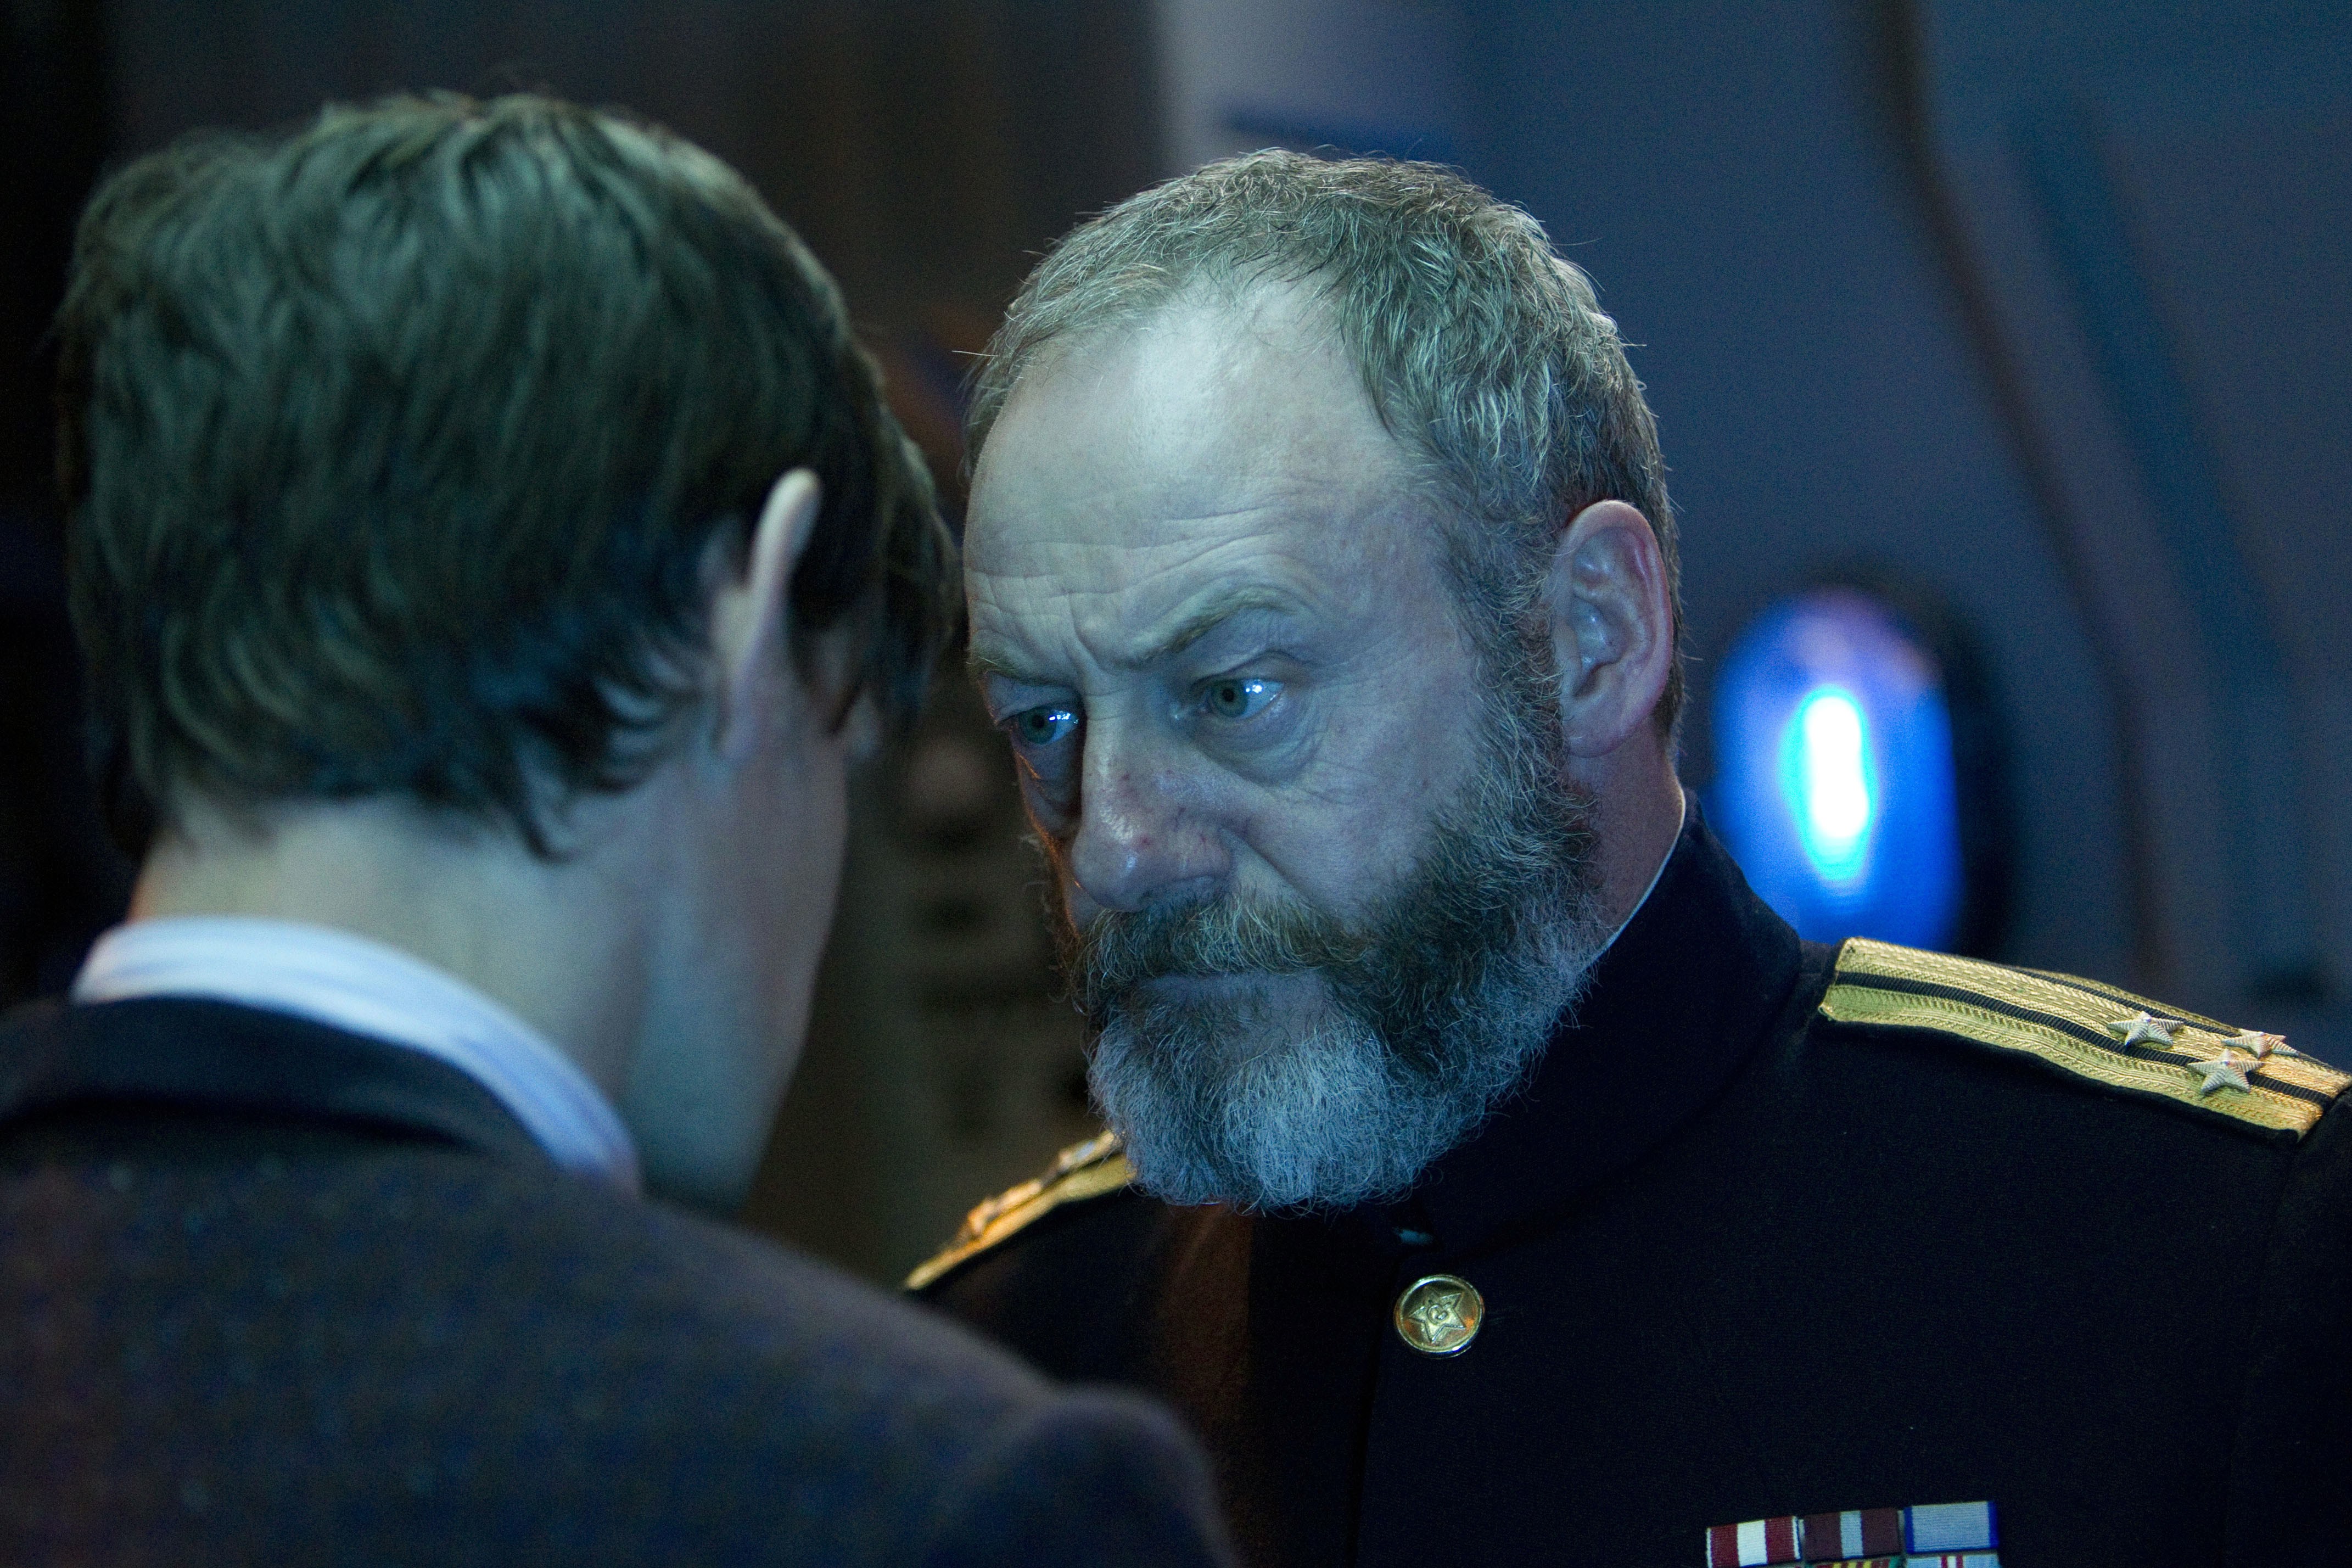 Doctor Who - Liam Cunningham as Capt. Zhukov in ‘Cold War’ episode